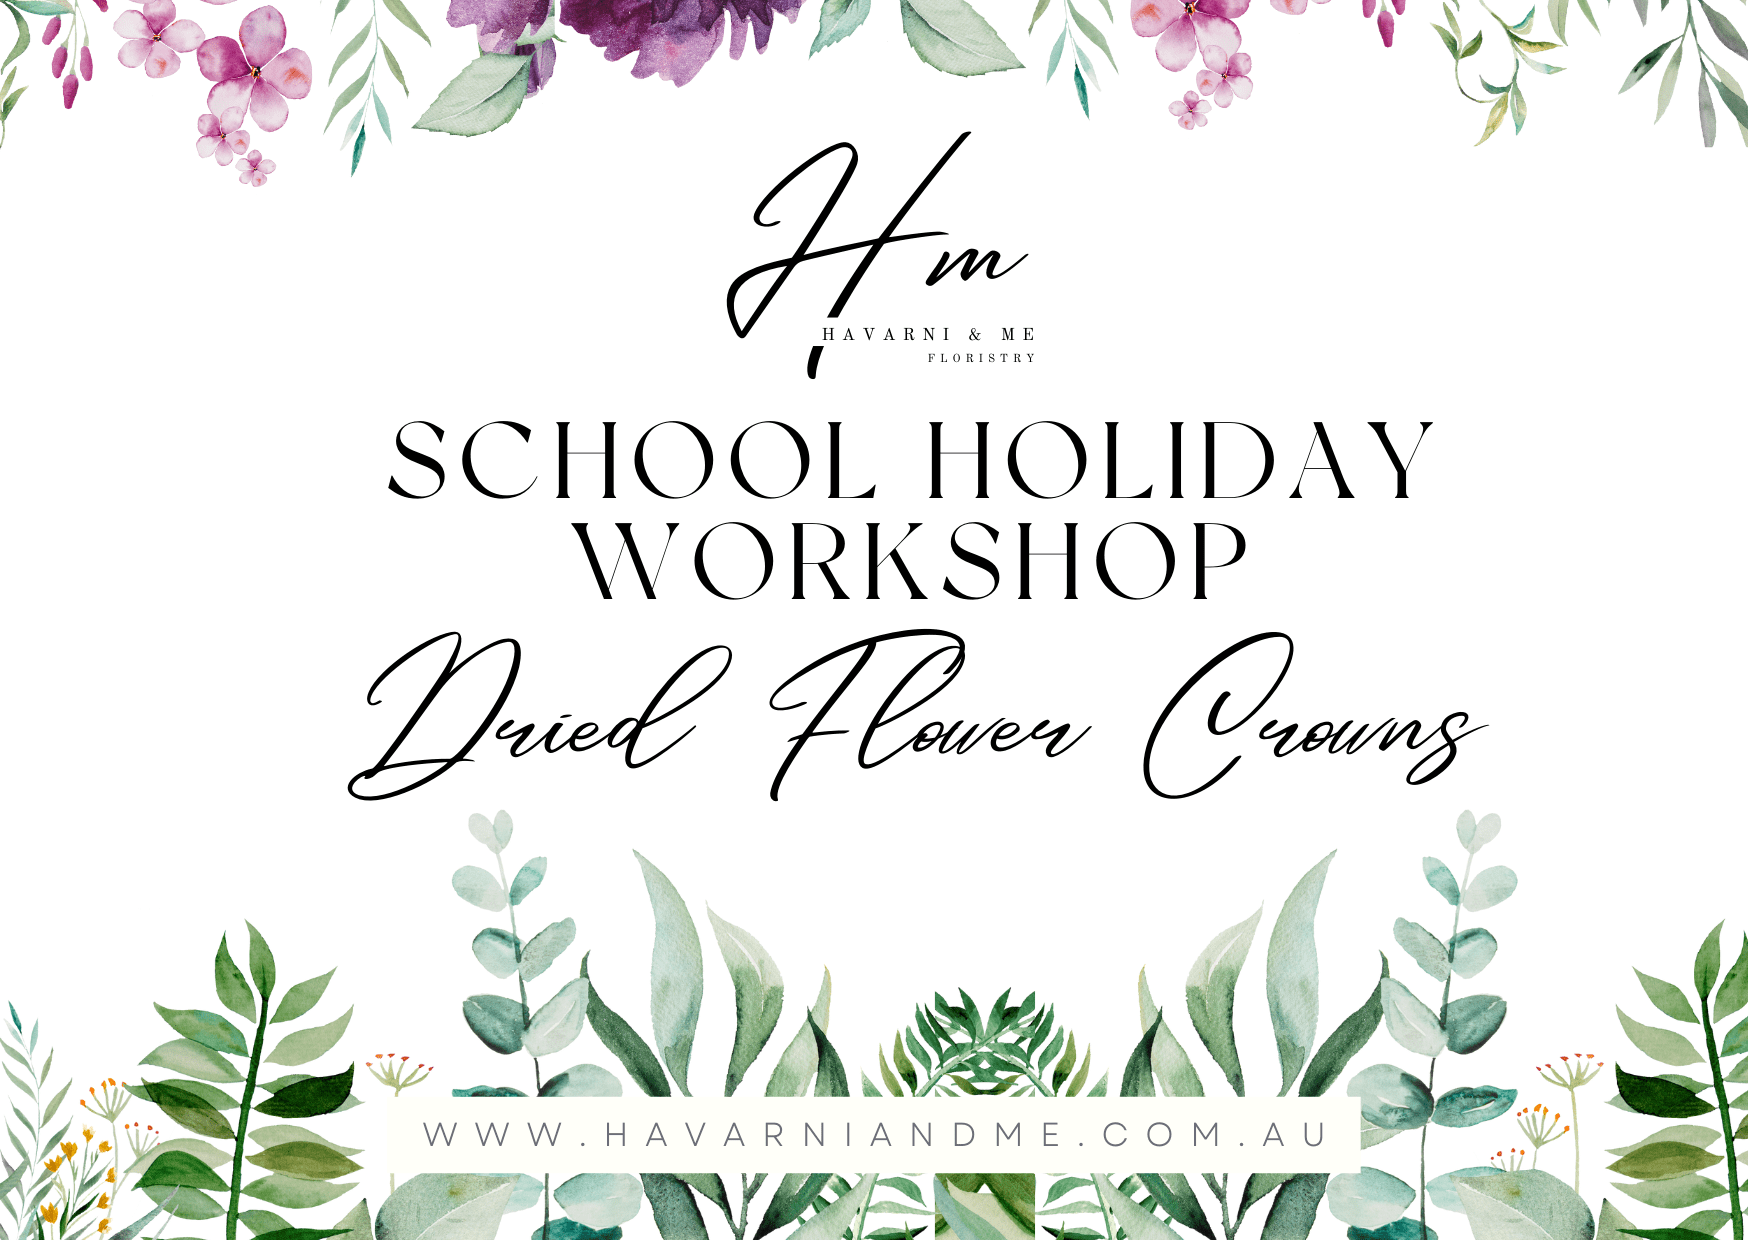 Featured image for “https://www.havarniandme.com.au/products/dried-flower-crowns-school-holiday-workshops-singleton-location”